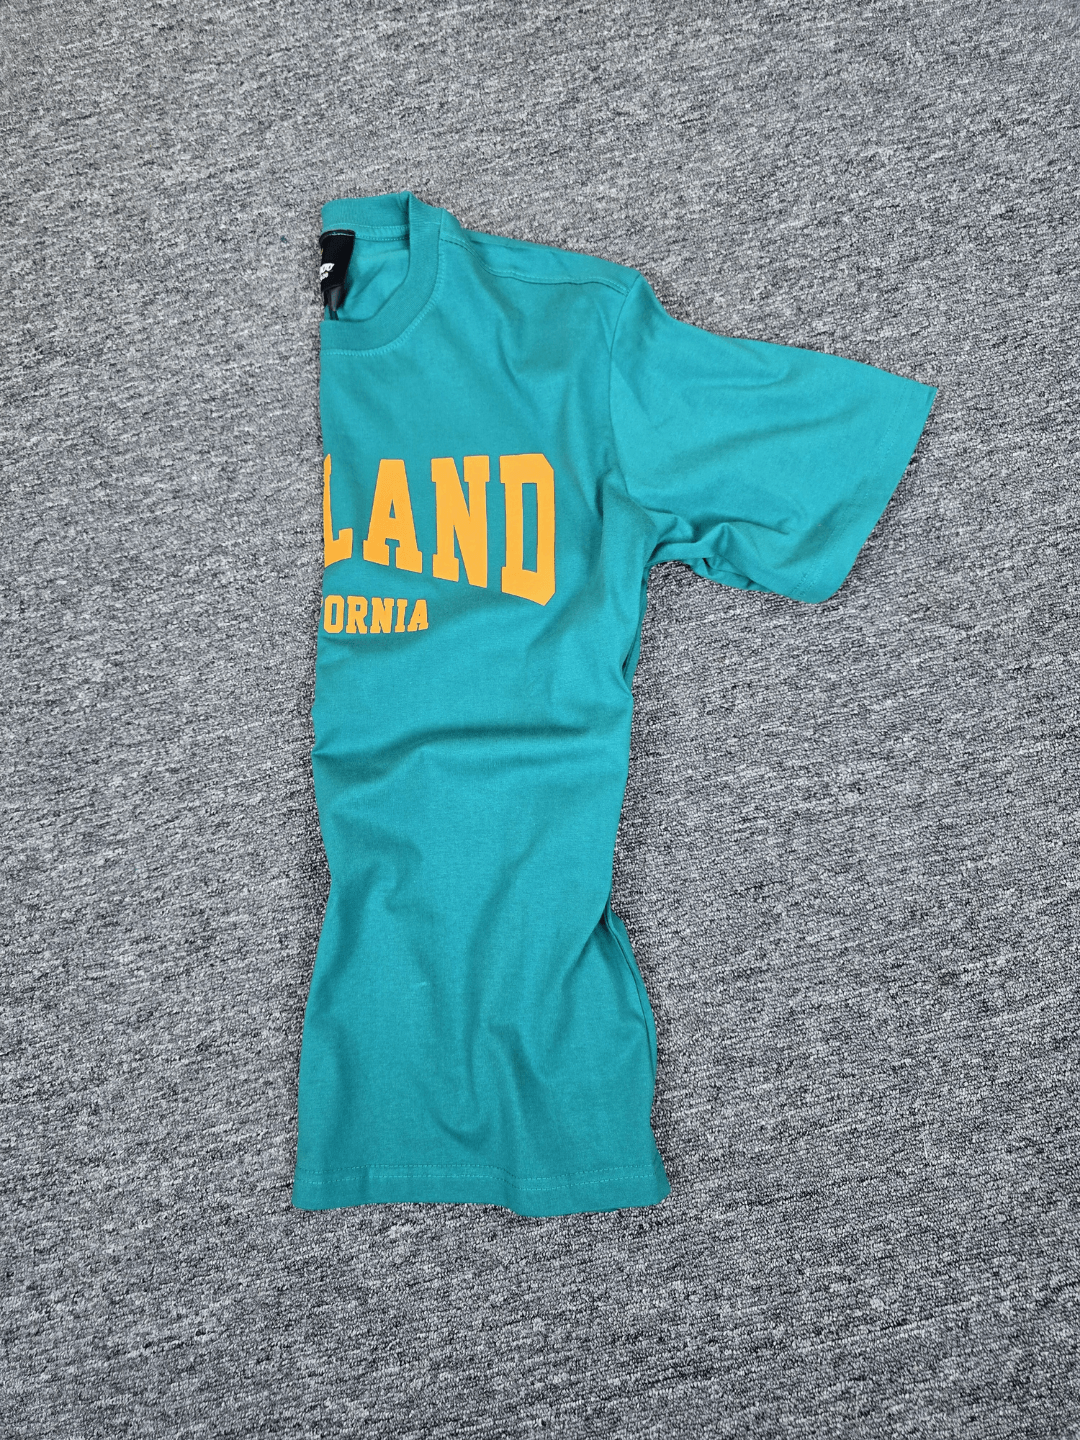 Mensoo New City Over Sized T Shirt Teal Blue